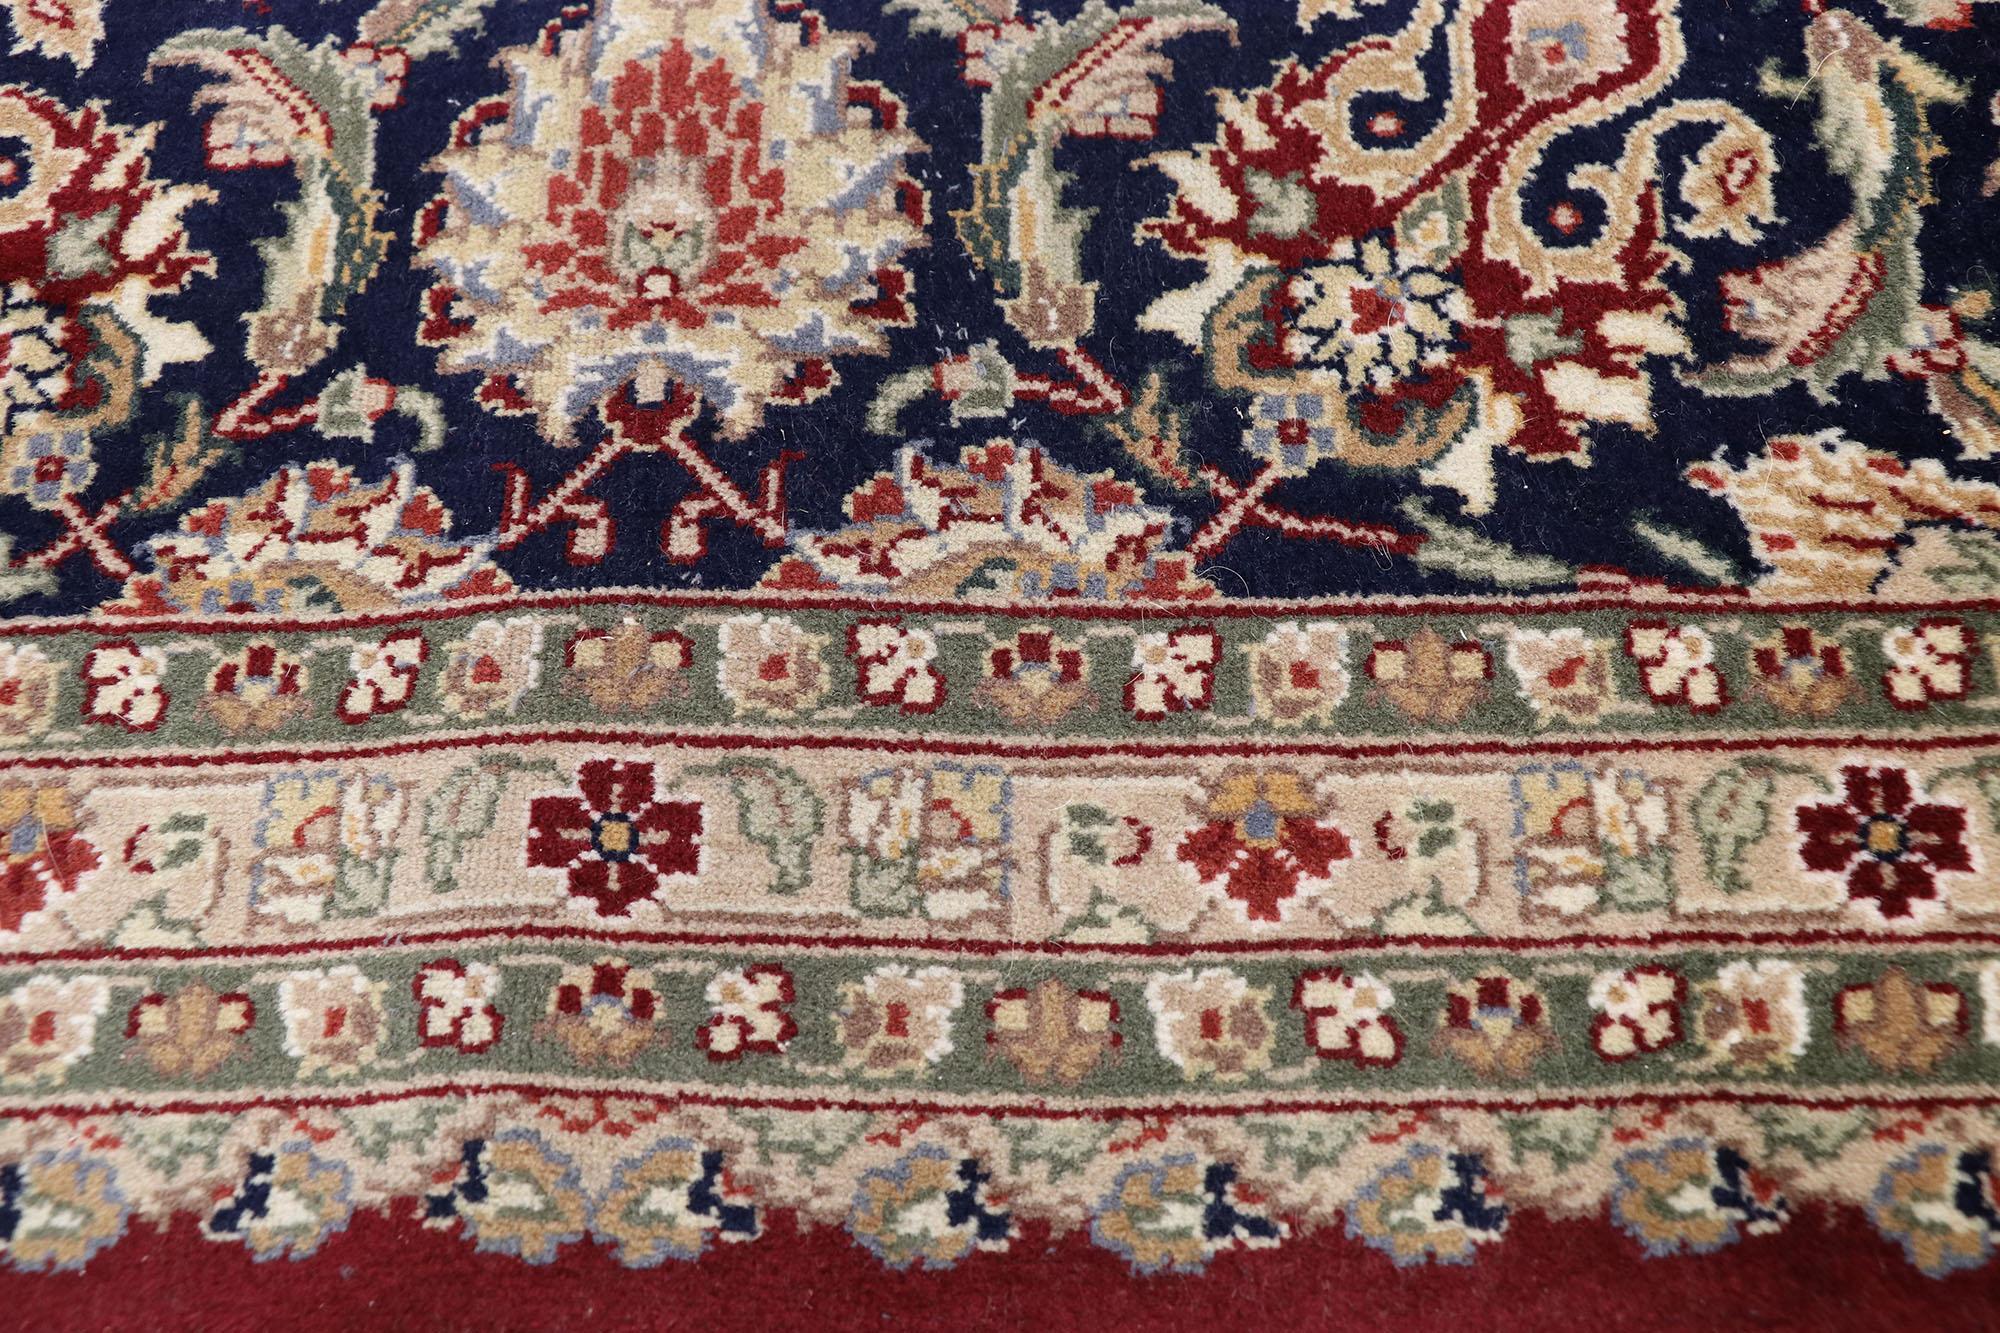 Vintage Chinese Persian Tabriz Design Rug with Colonial and Federal Style In Good Condition For Sale In Dallas, TX